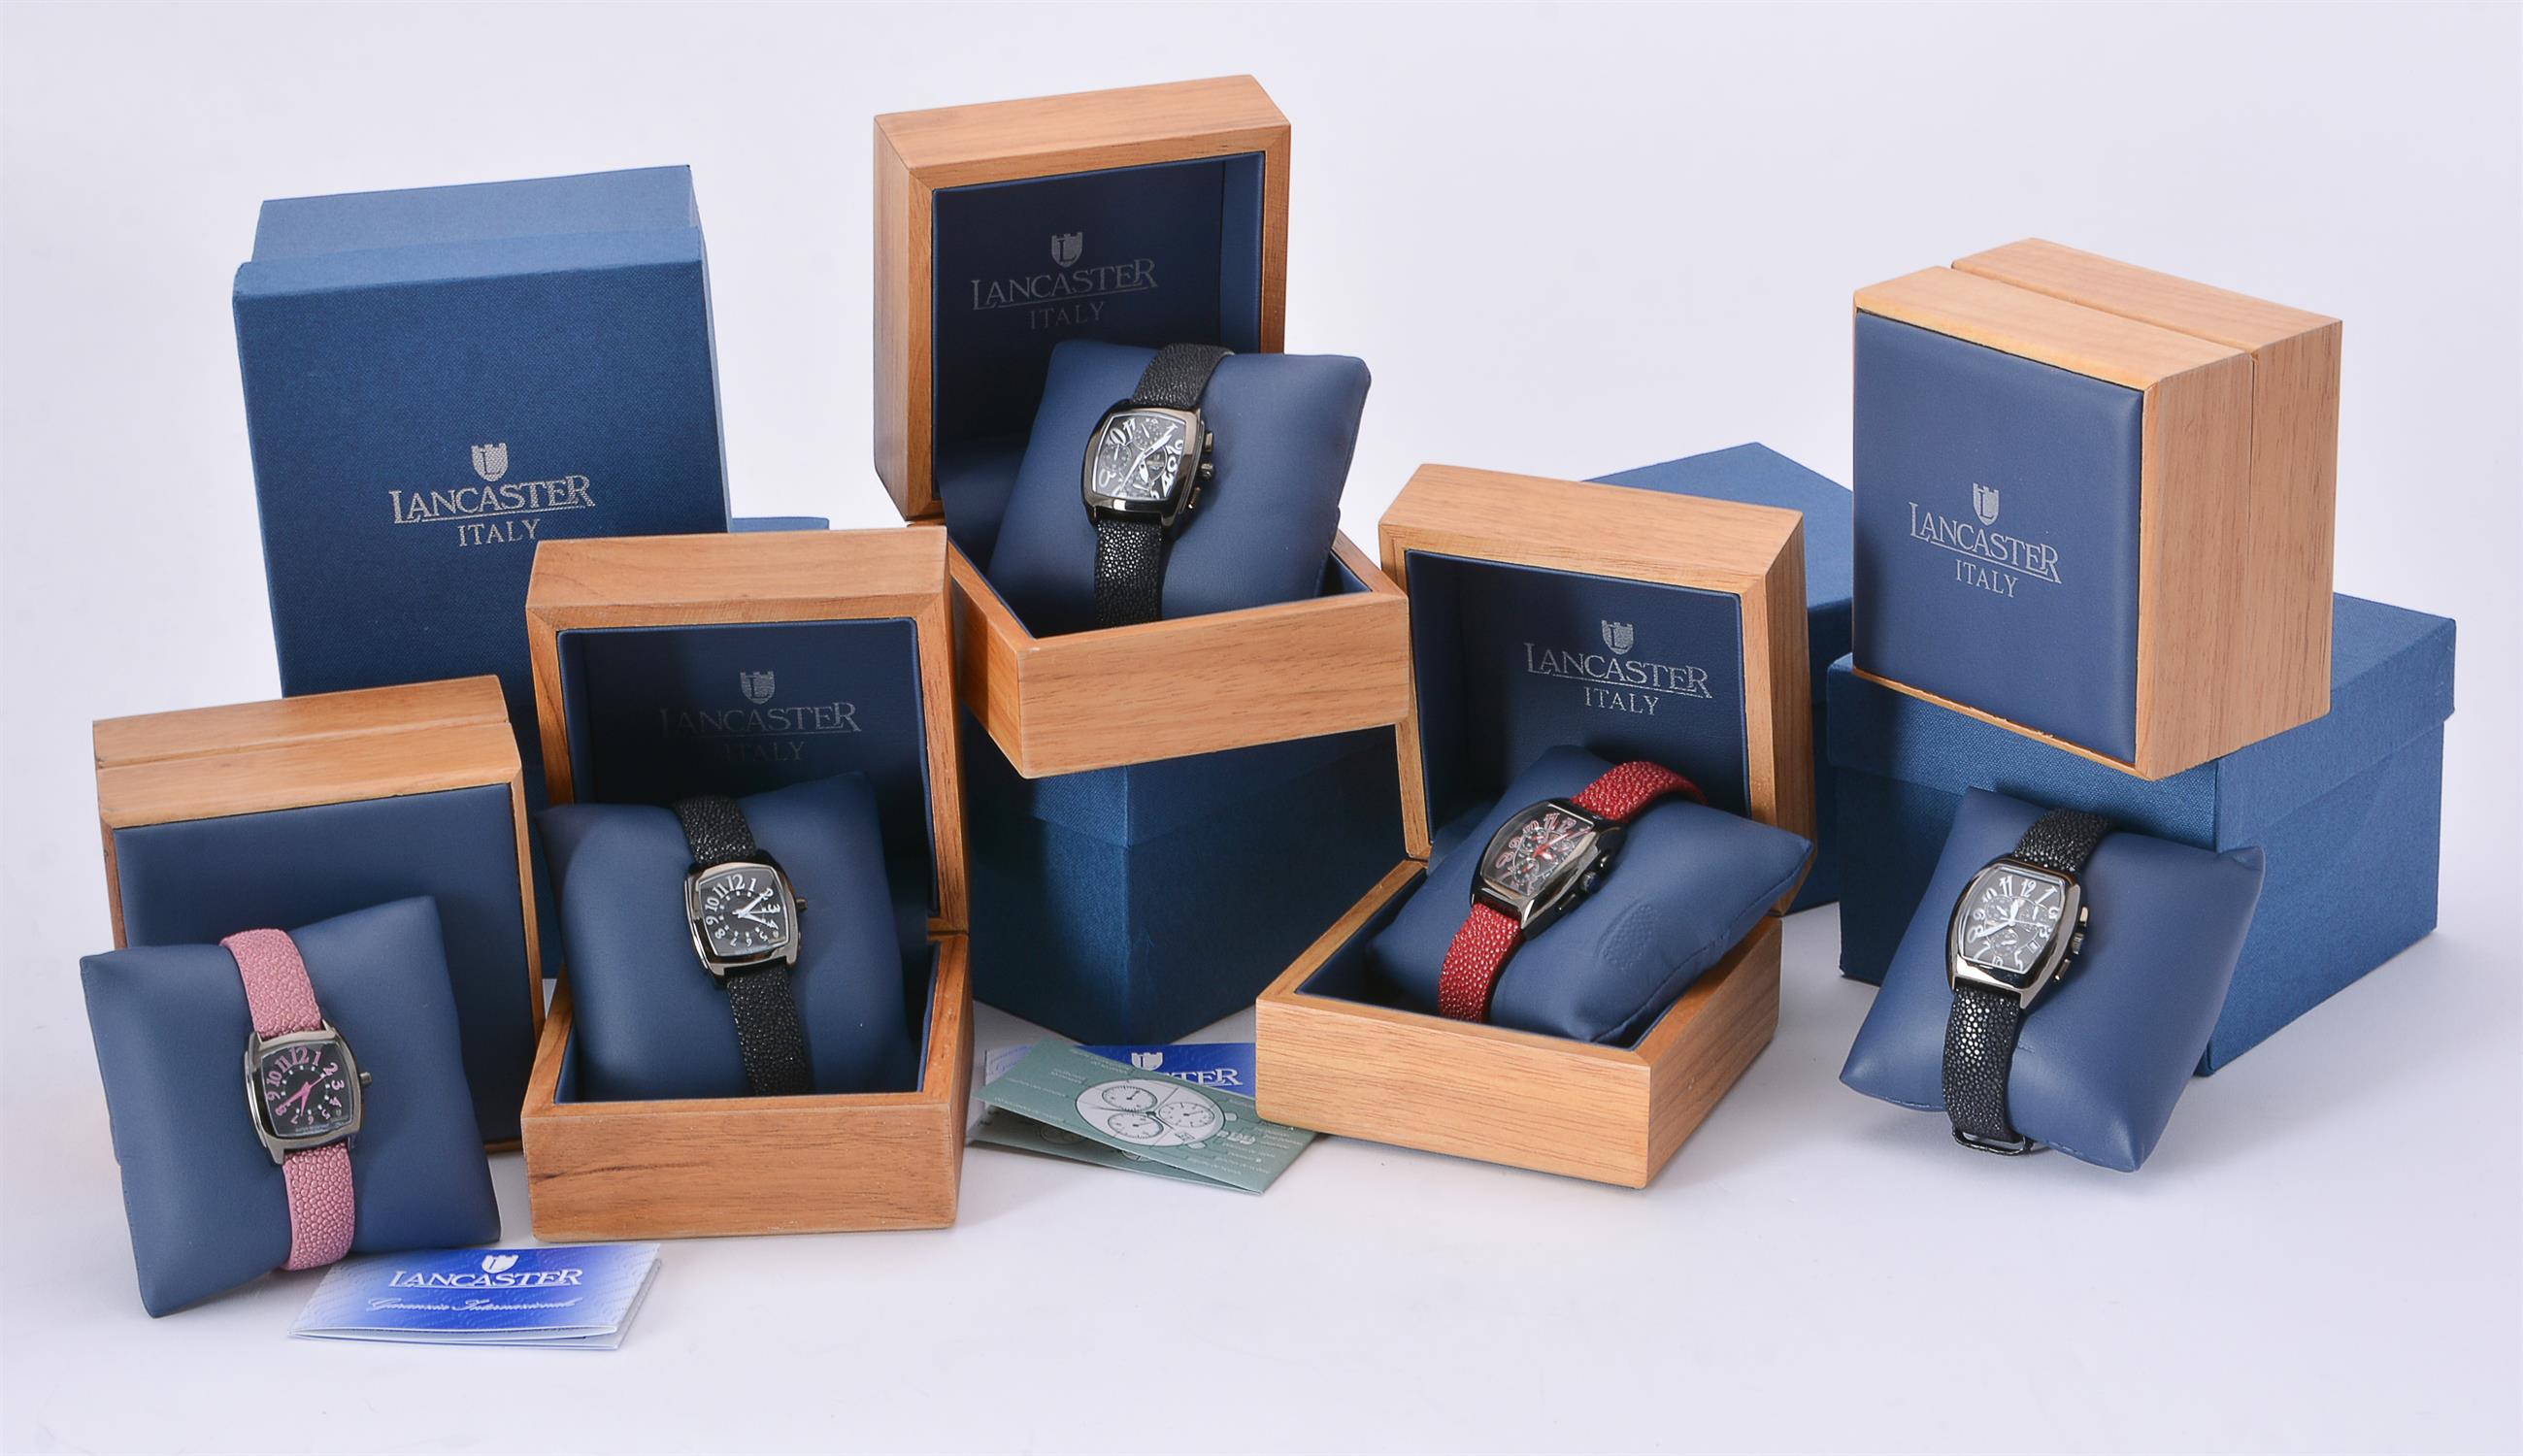 Five wristwatches by Lancaster Italy